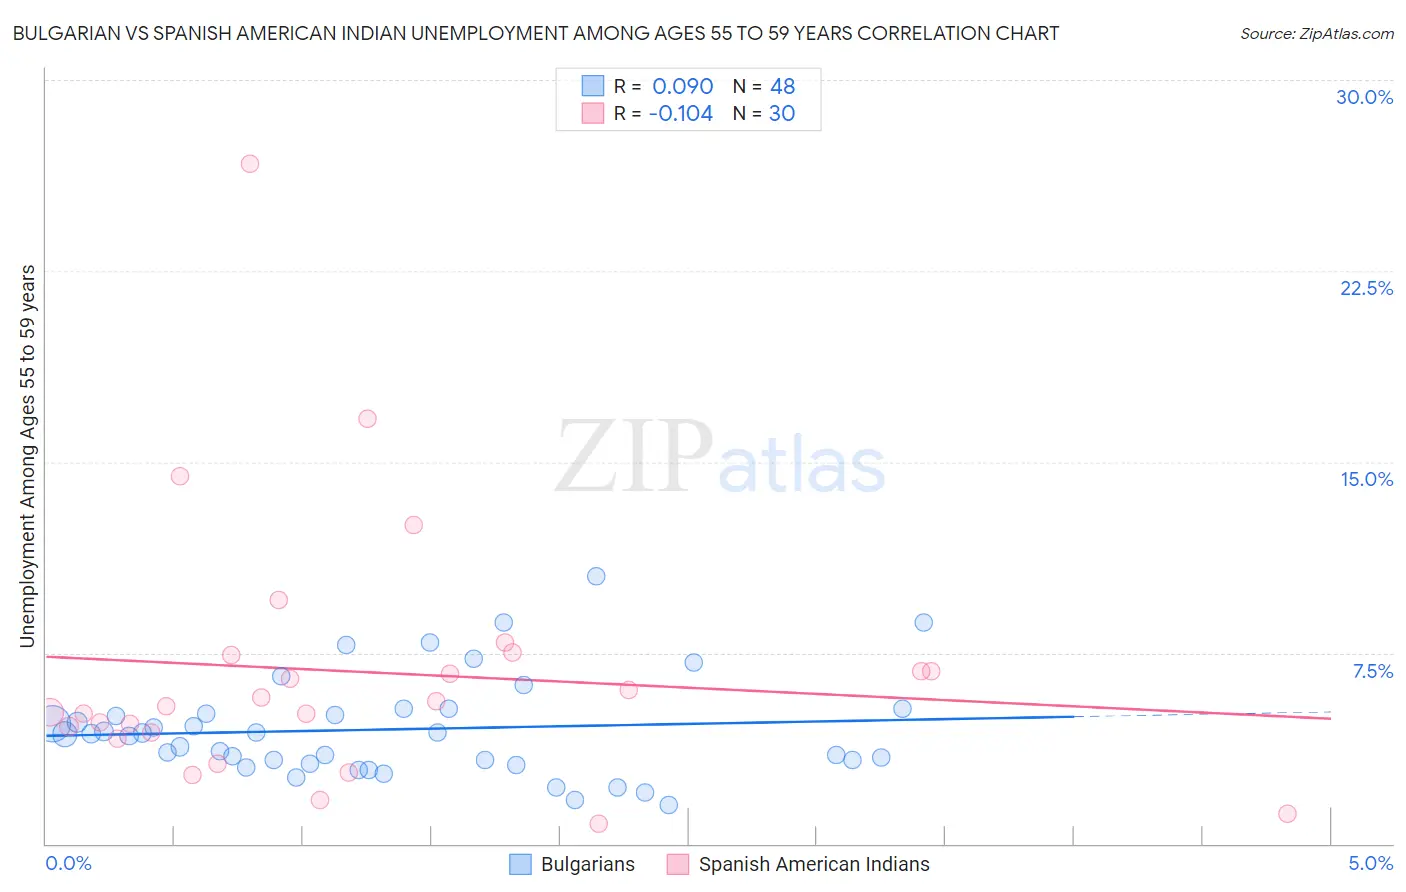 Bulgarian vs Spanish American Indian Unemployment Among Ages 55 to 59 years